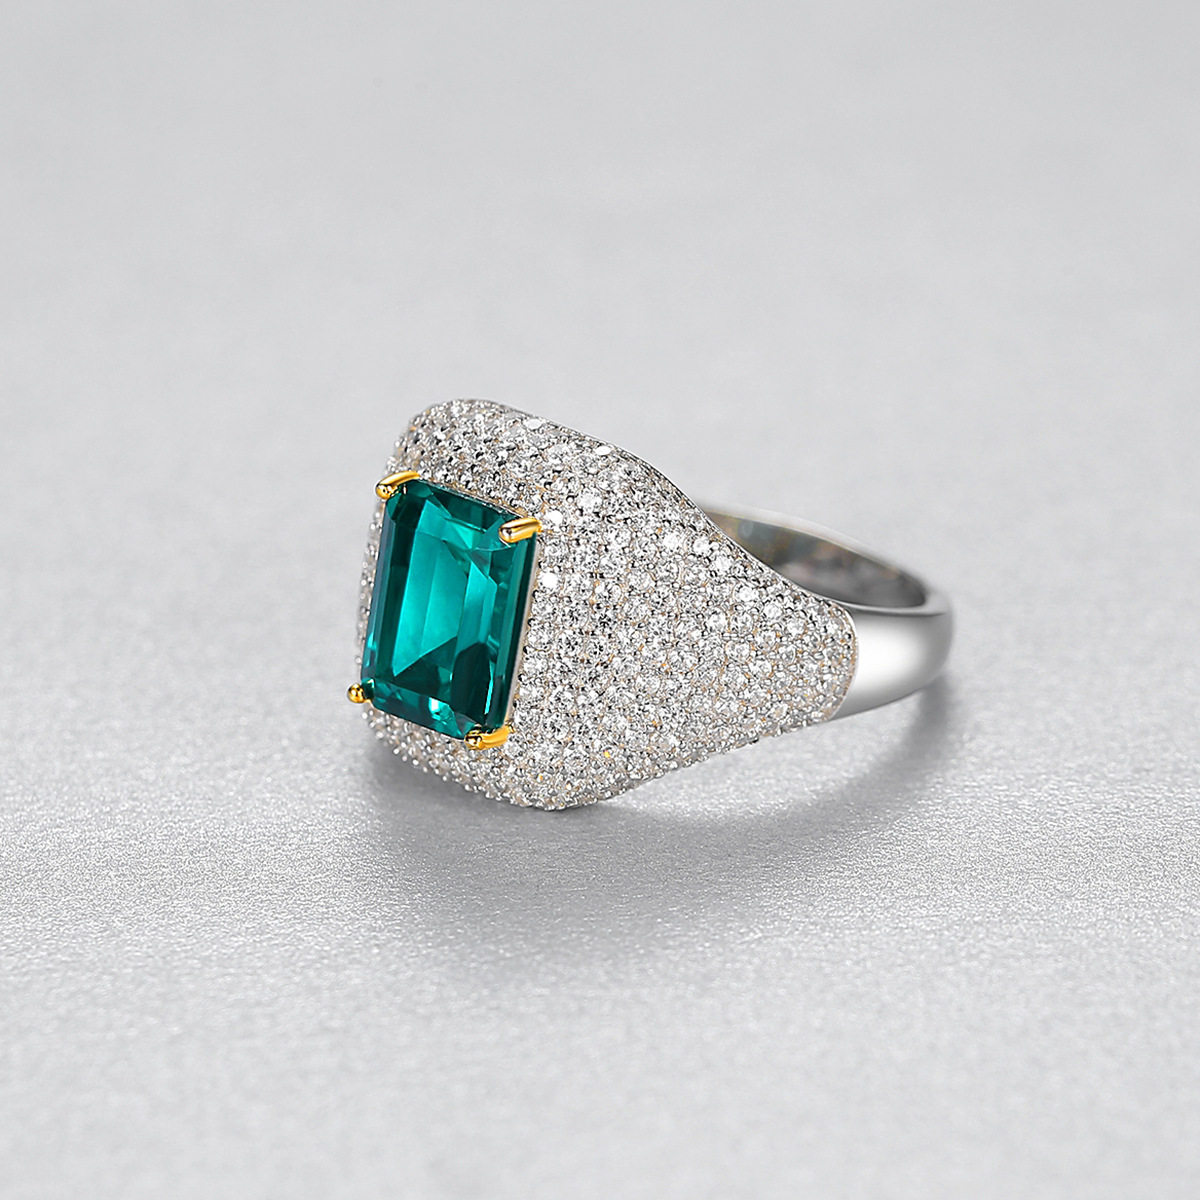 Retro Emerald With Cz Sterling Silver Ring